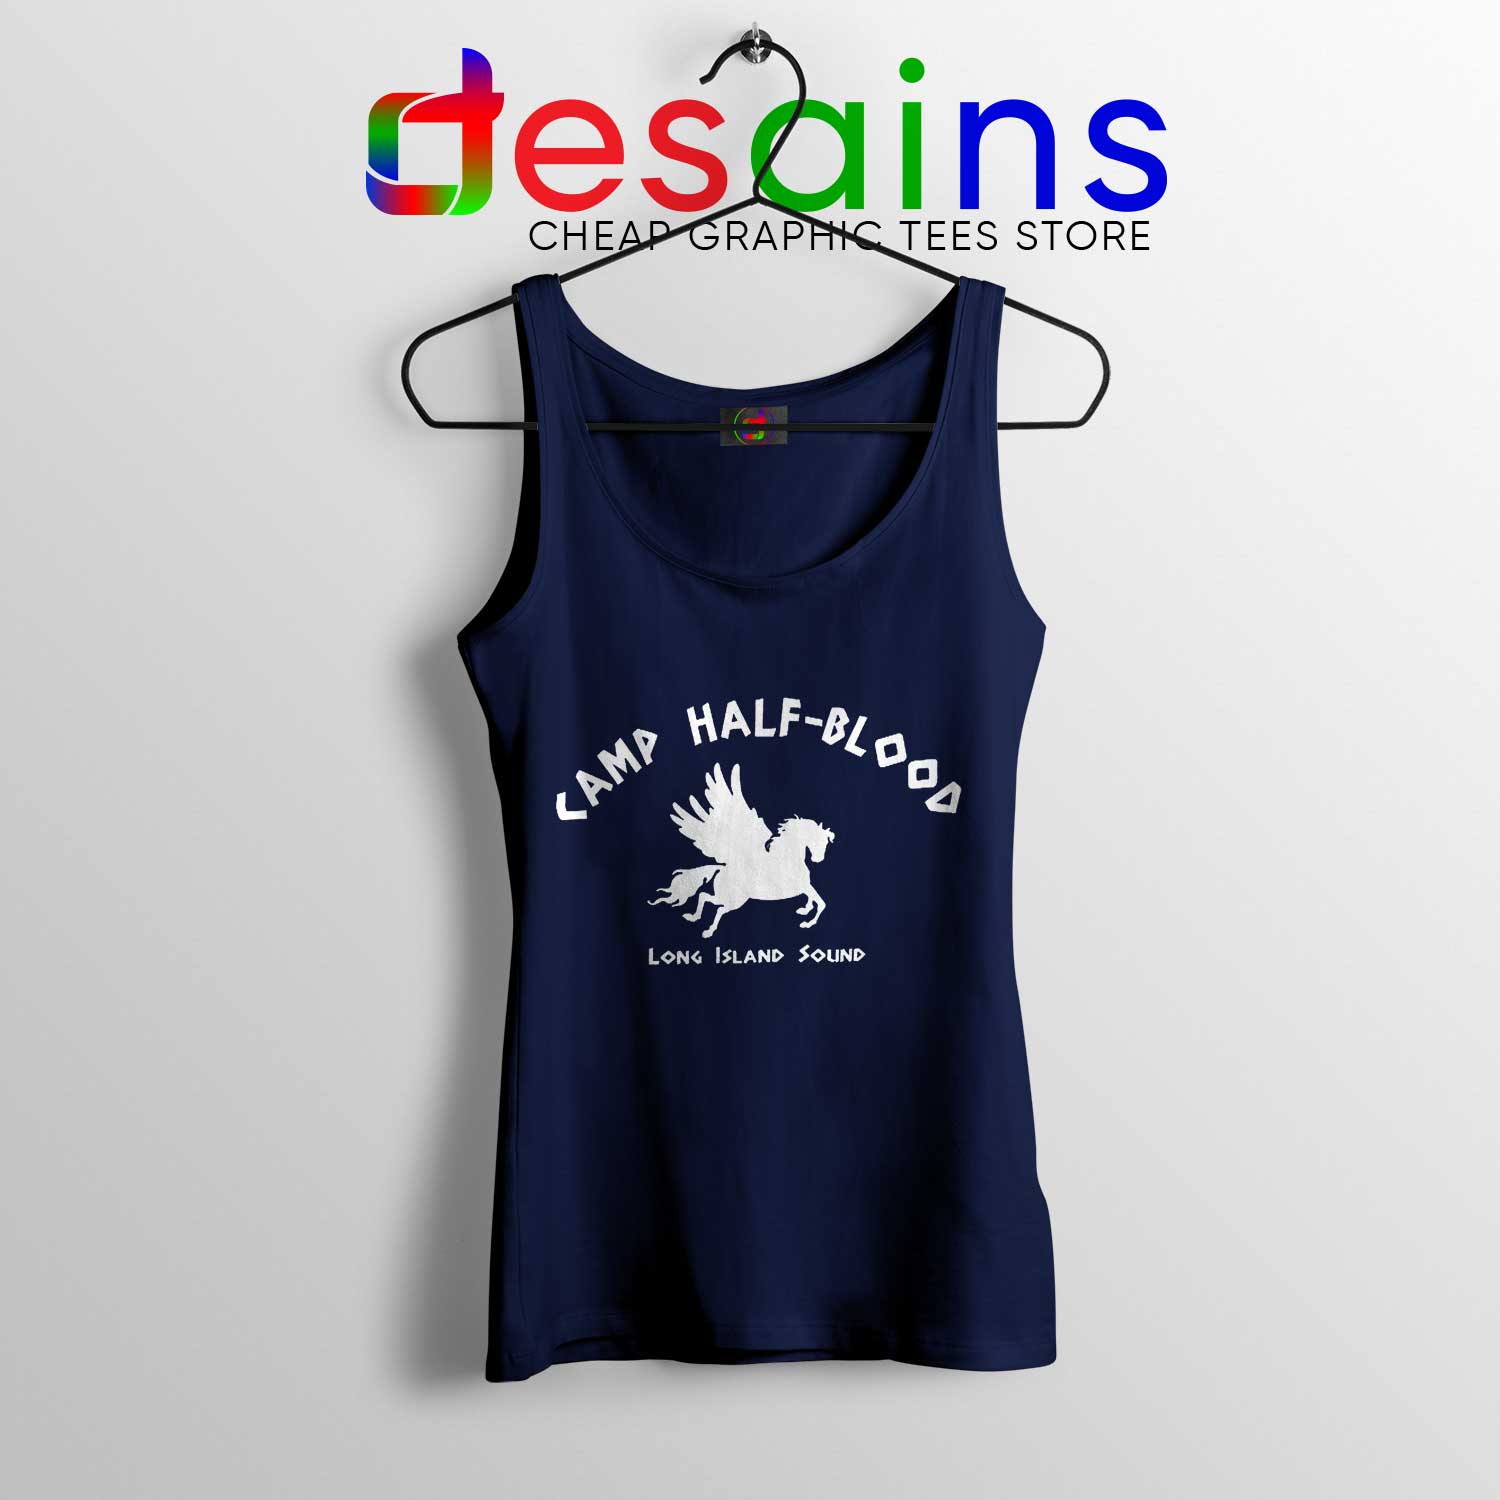 T-shirt Camp Half-Blood chronicles Percy Jackson & the Olympians